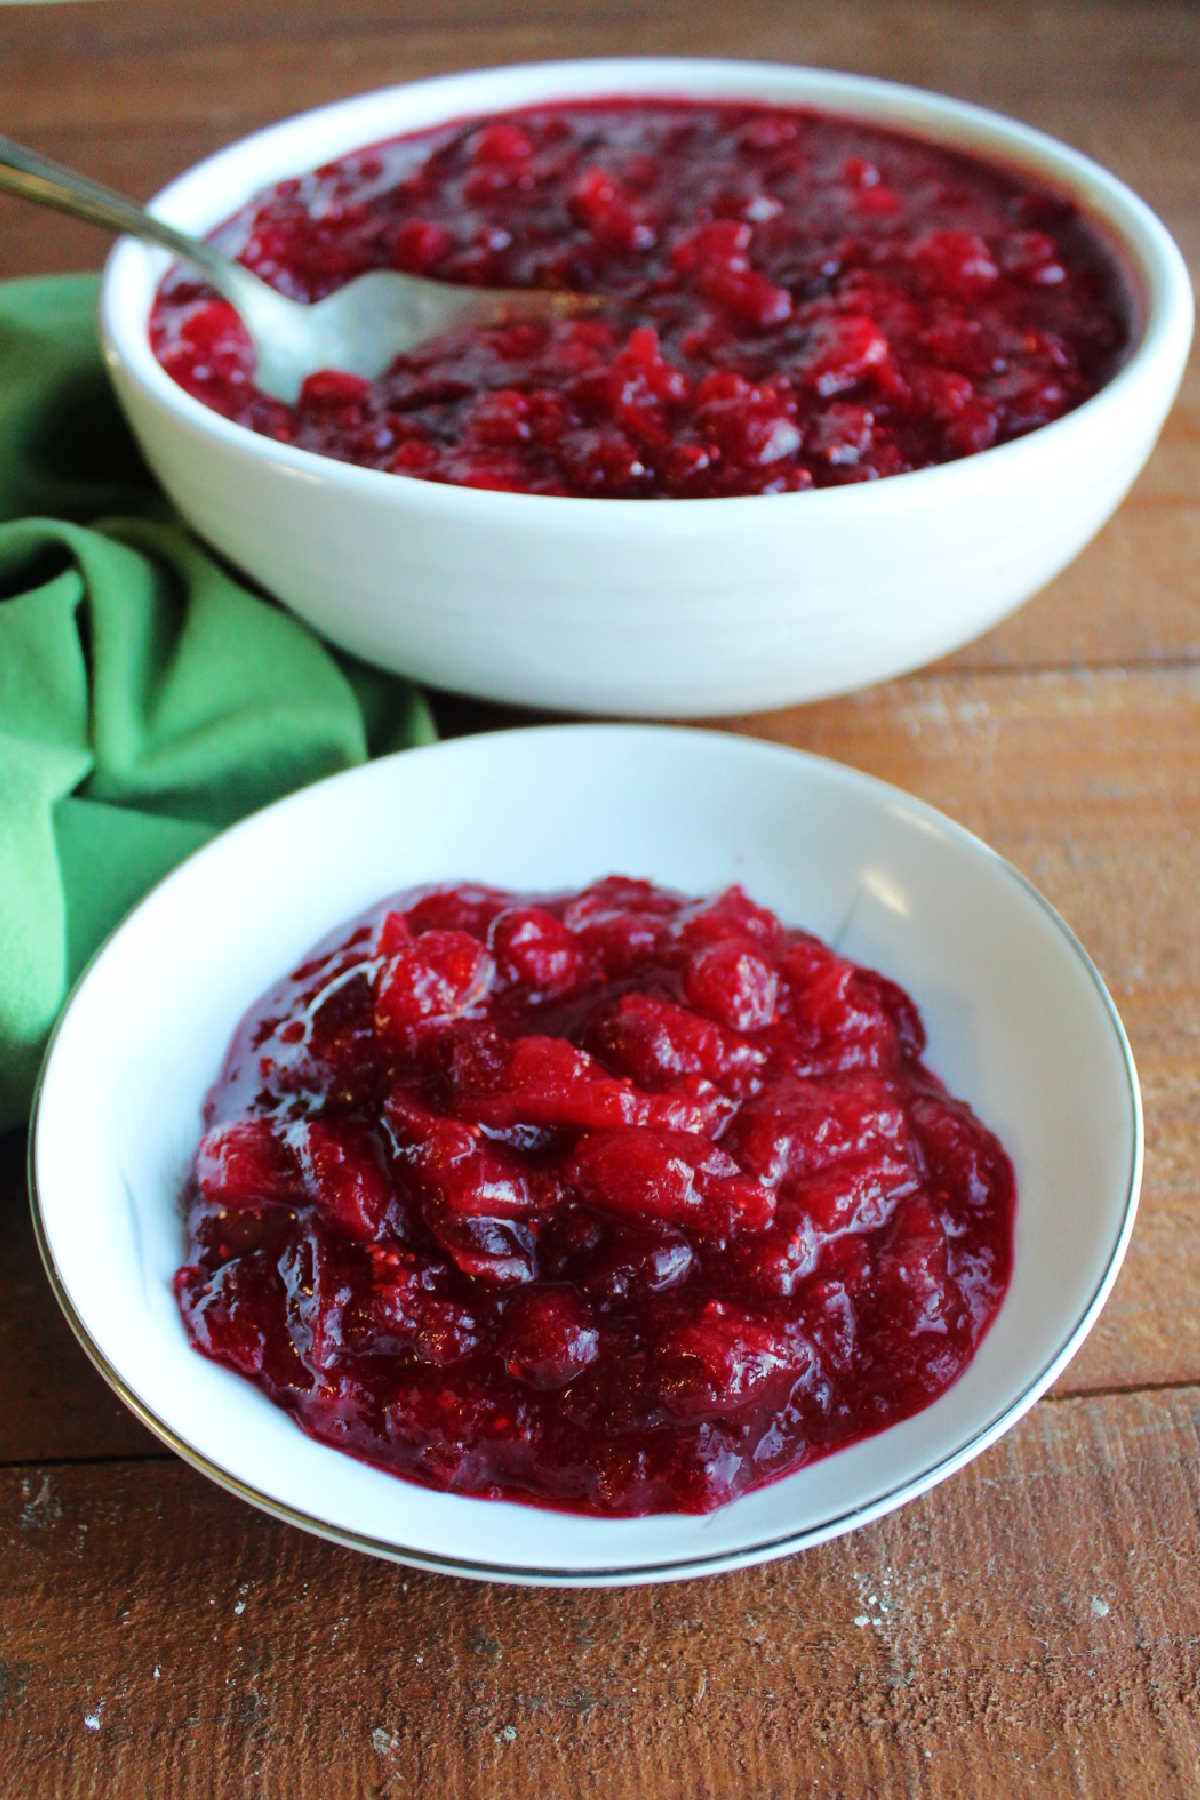 Small bowl with serving of homemade orange cranberry sauce with larger serving bowl in the background.